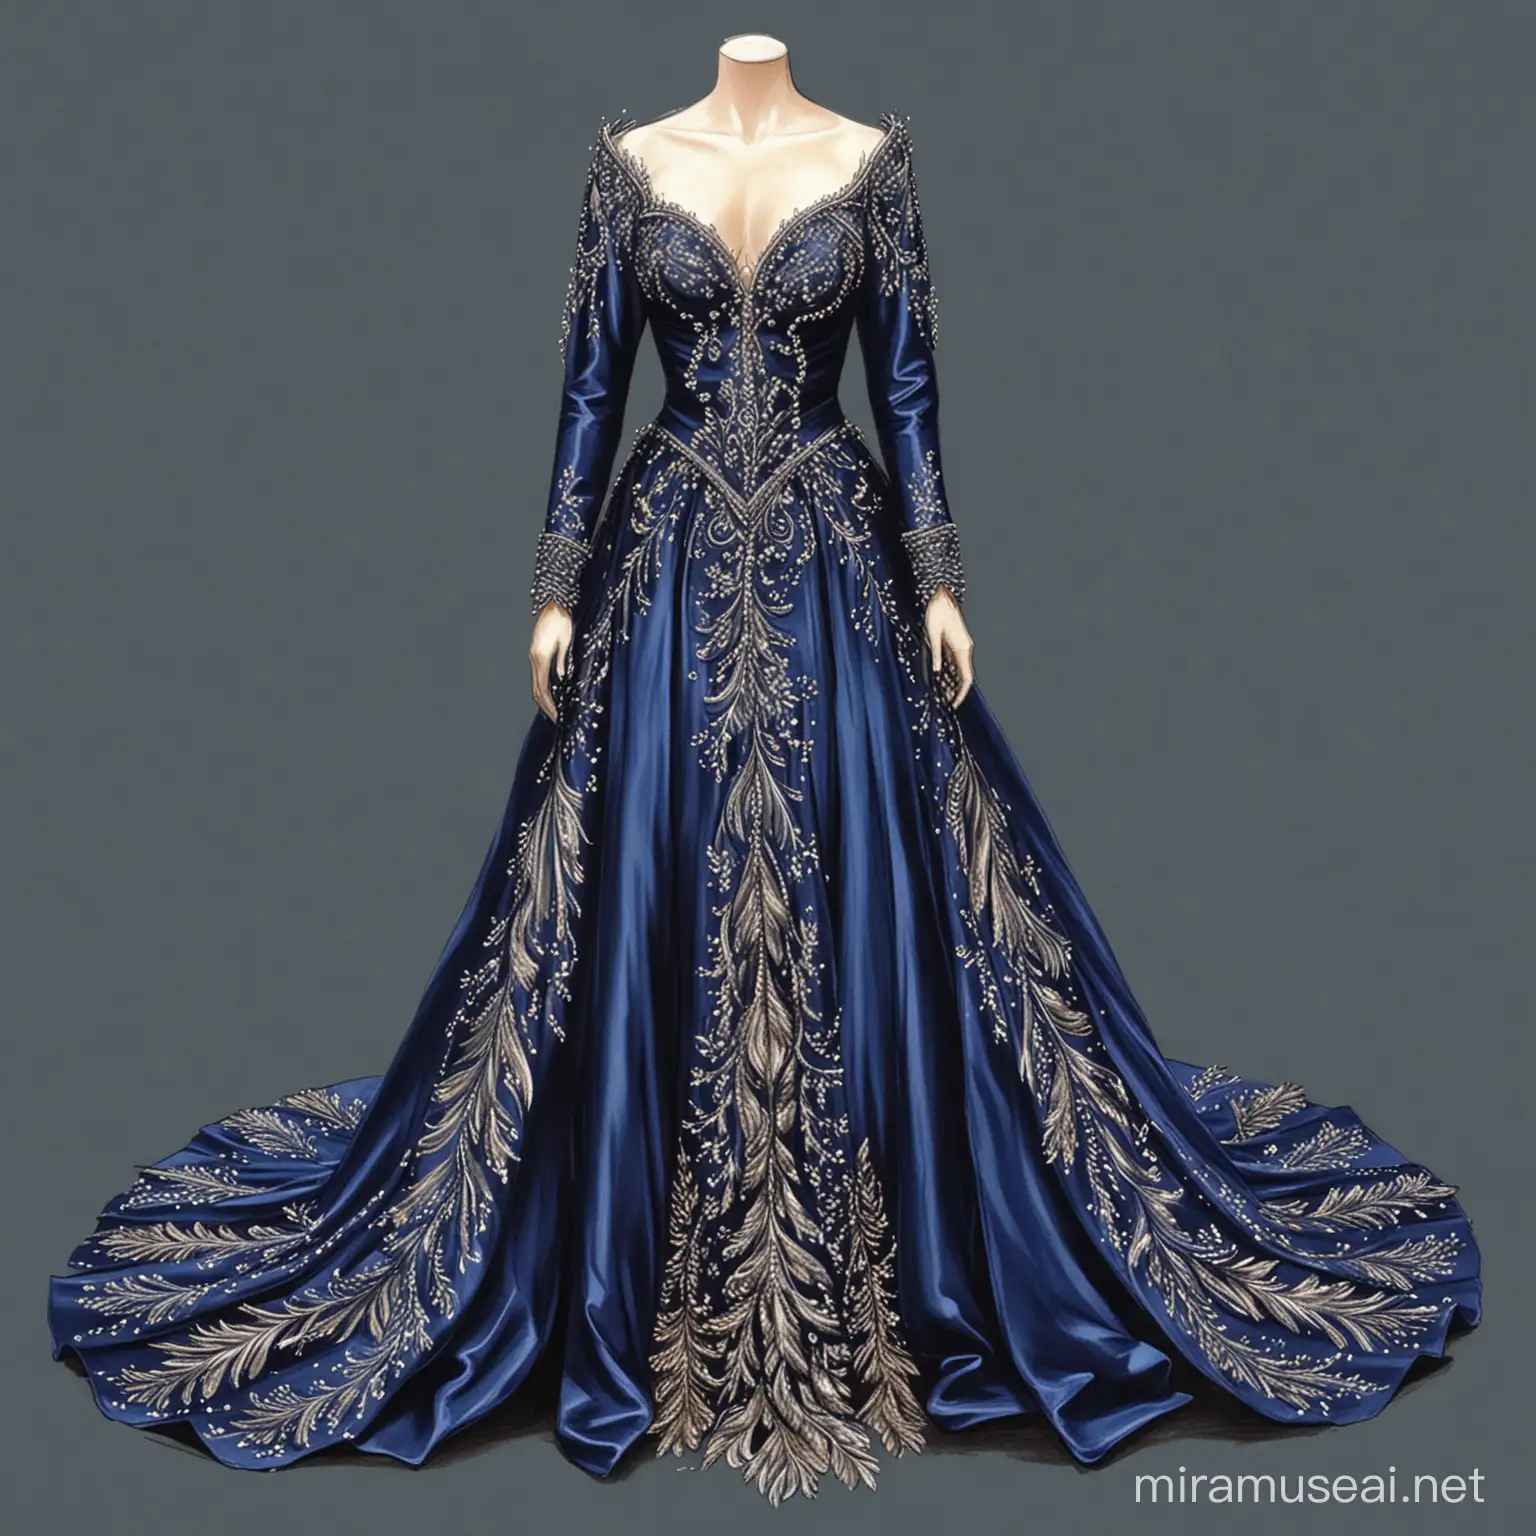 Regal Elegance FloorLength Gown in Royal Blue Satin with Embroidery Sequins and Feathers